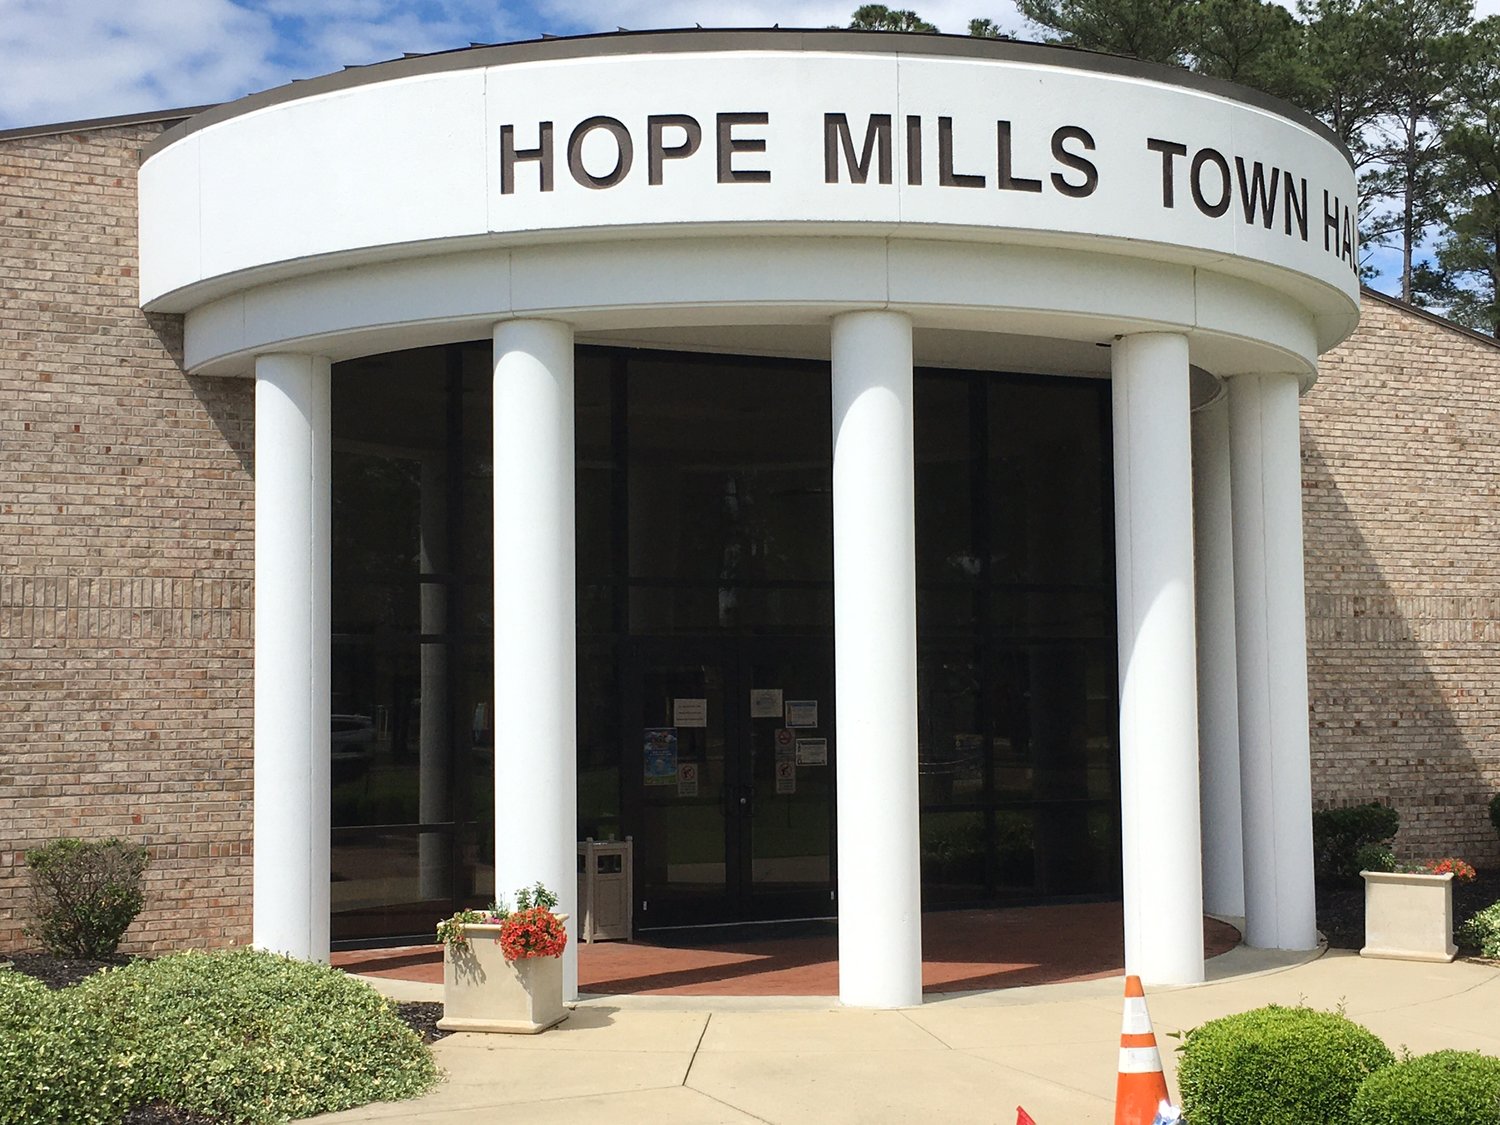 The Hope Mills Board of Commissioners on Monday will hold a public hearing on the proposed fiscal 2022-23 budget.